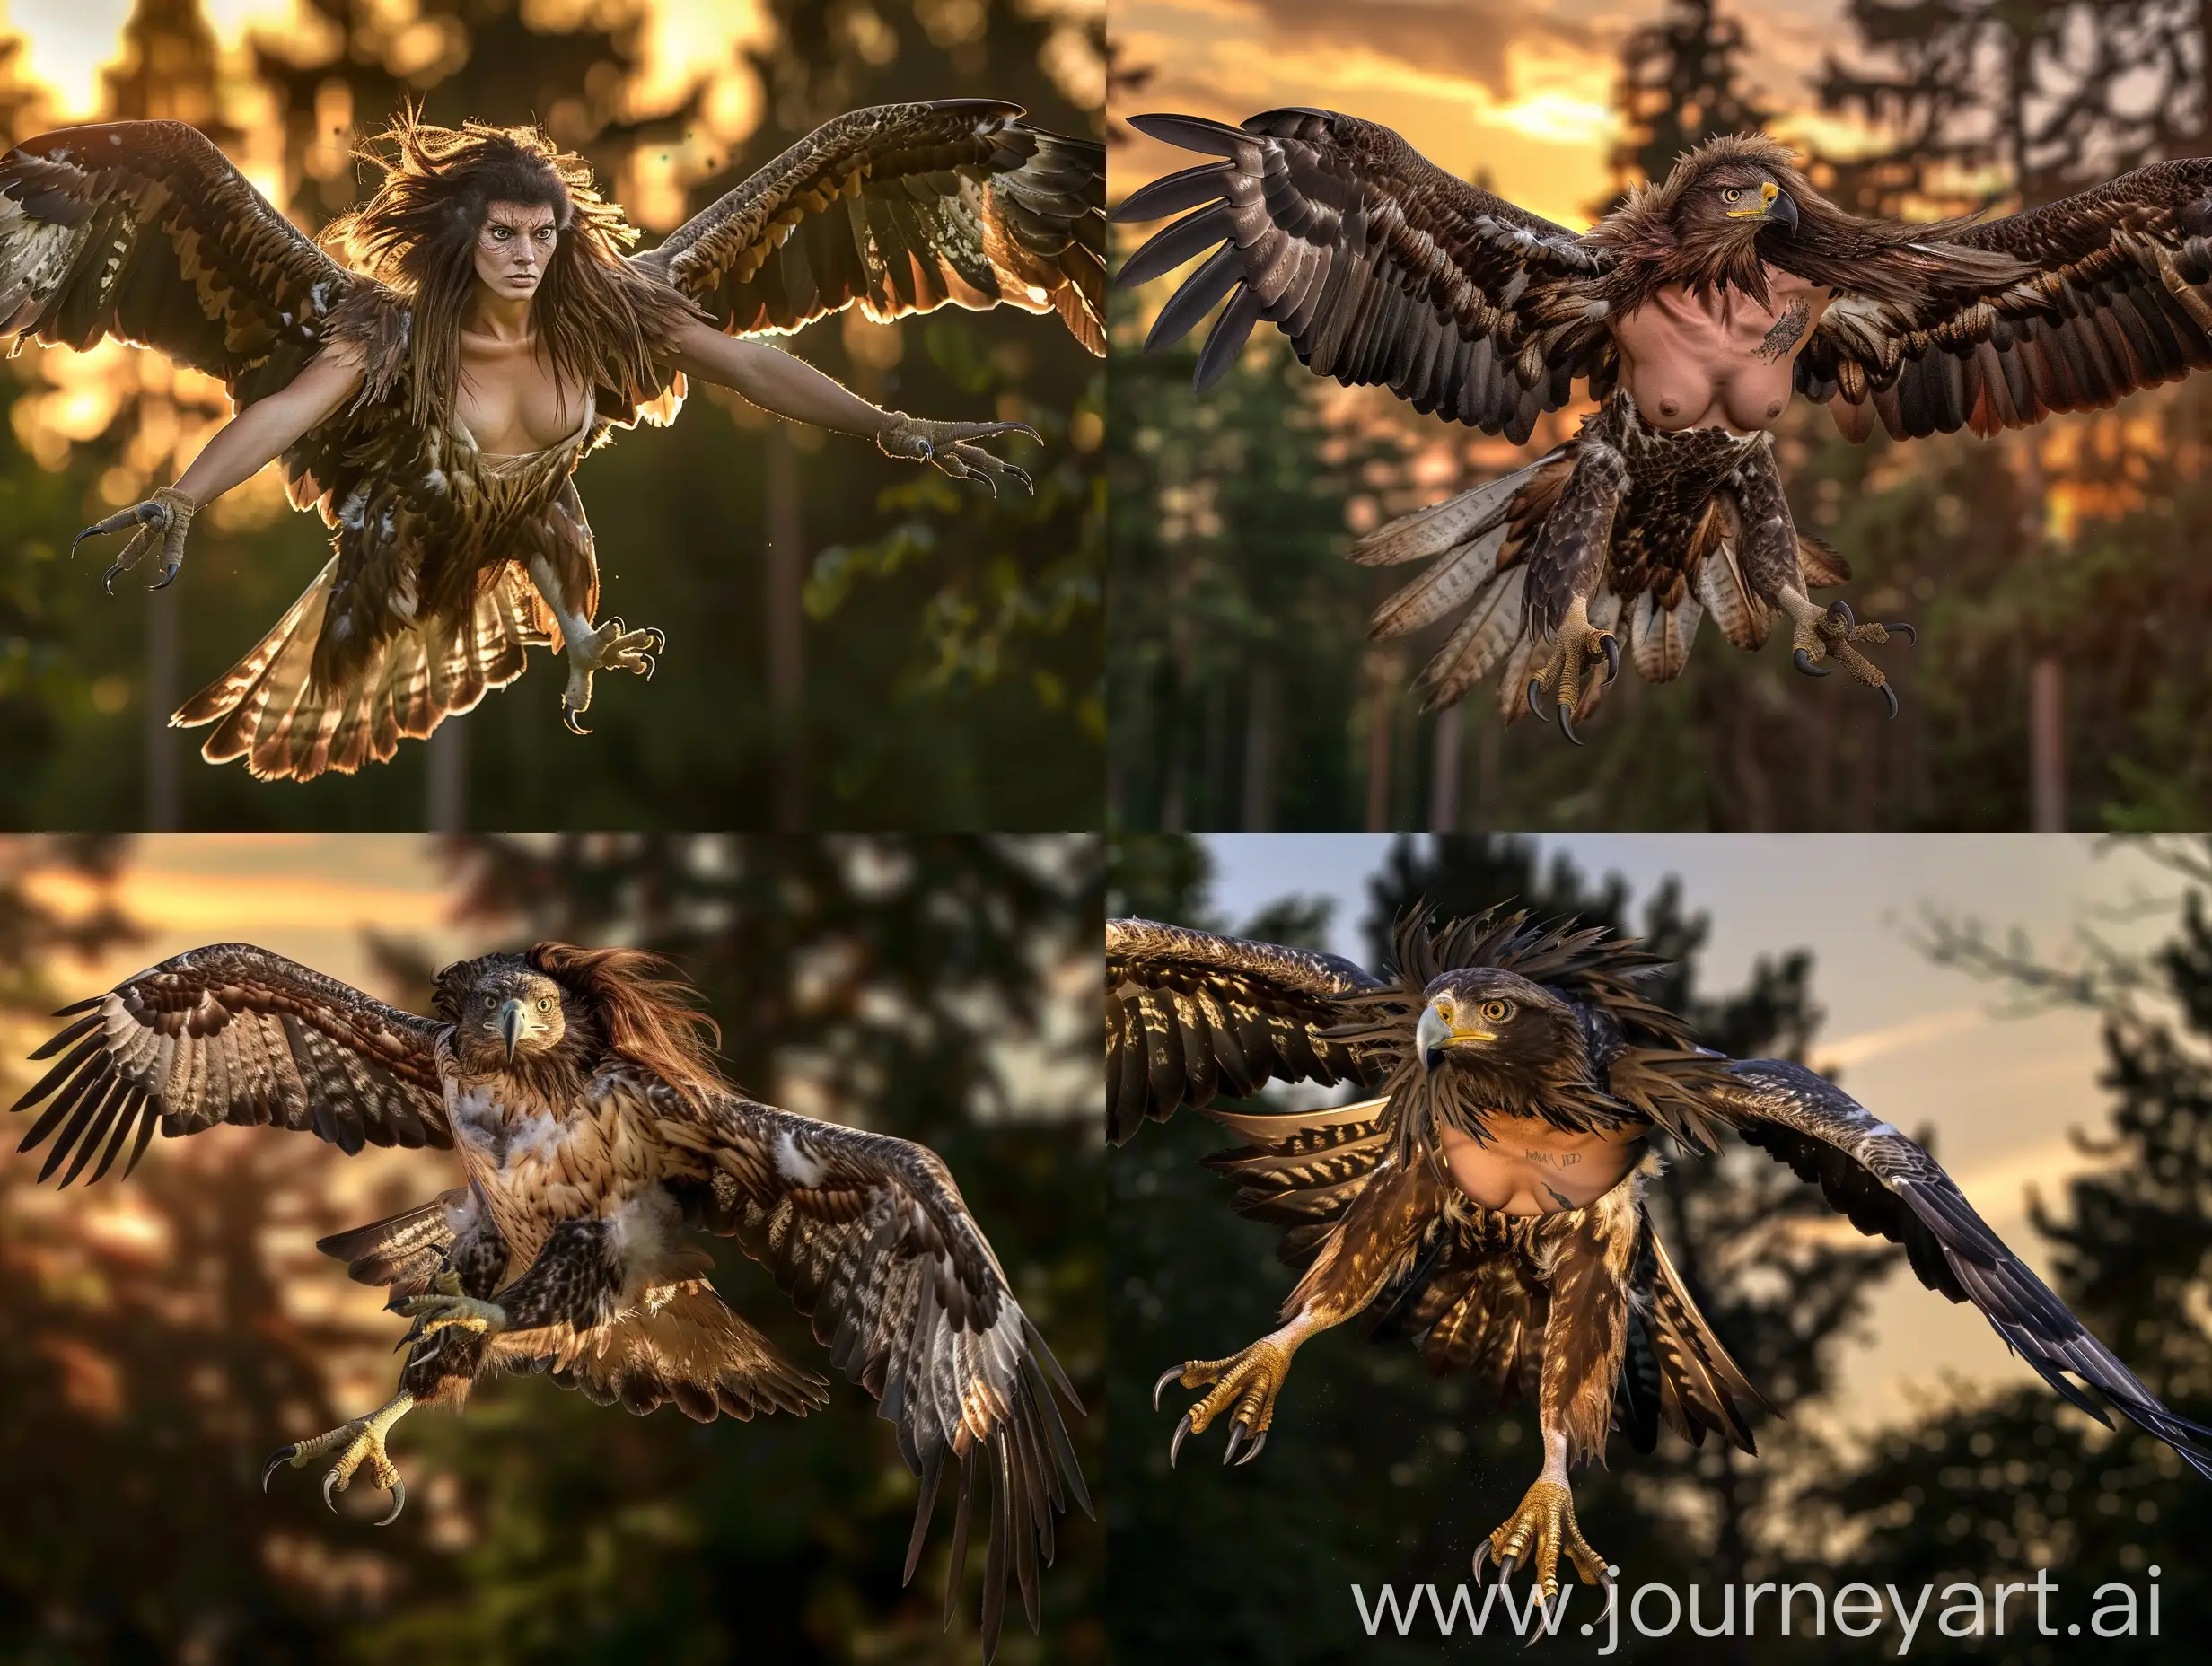 An eagle. She has loose brown hair, a beautiful human face and a chest. She has feathers, claws and wings. She is flying over a forest at sunset. She has claws for feet. Realistic photograph, full body picture.